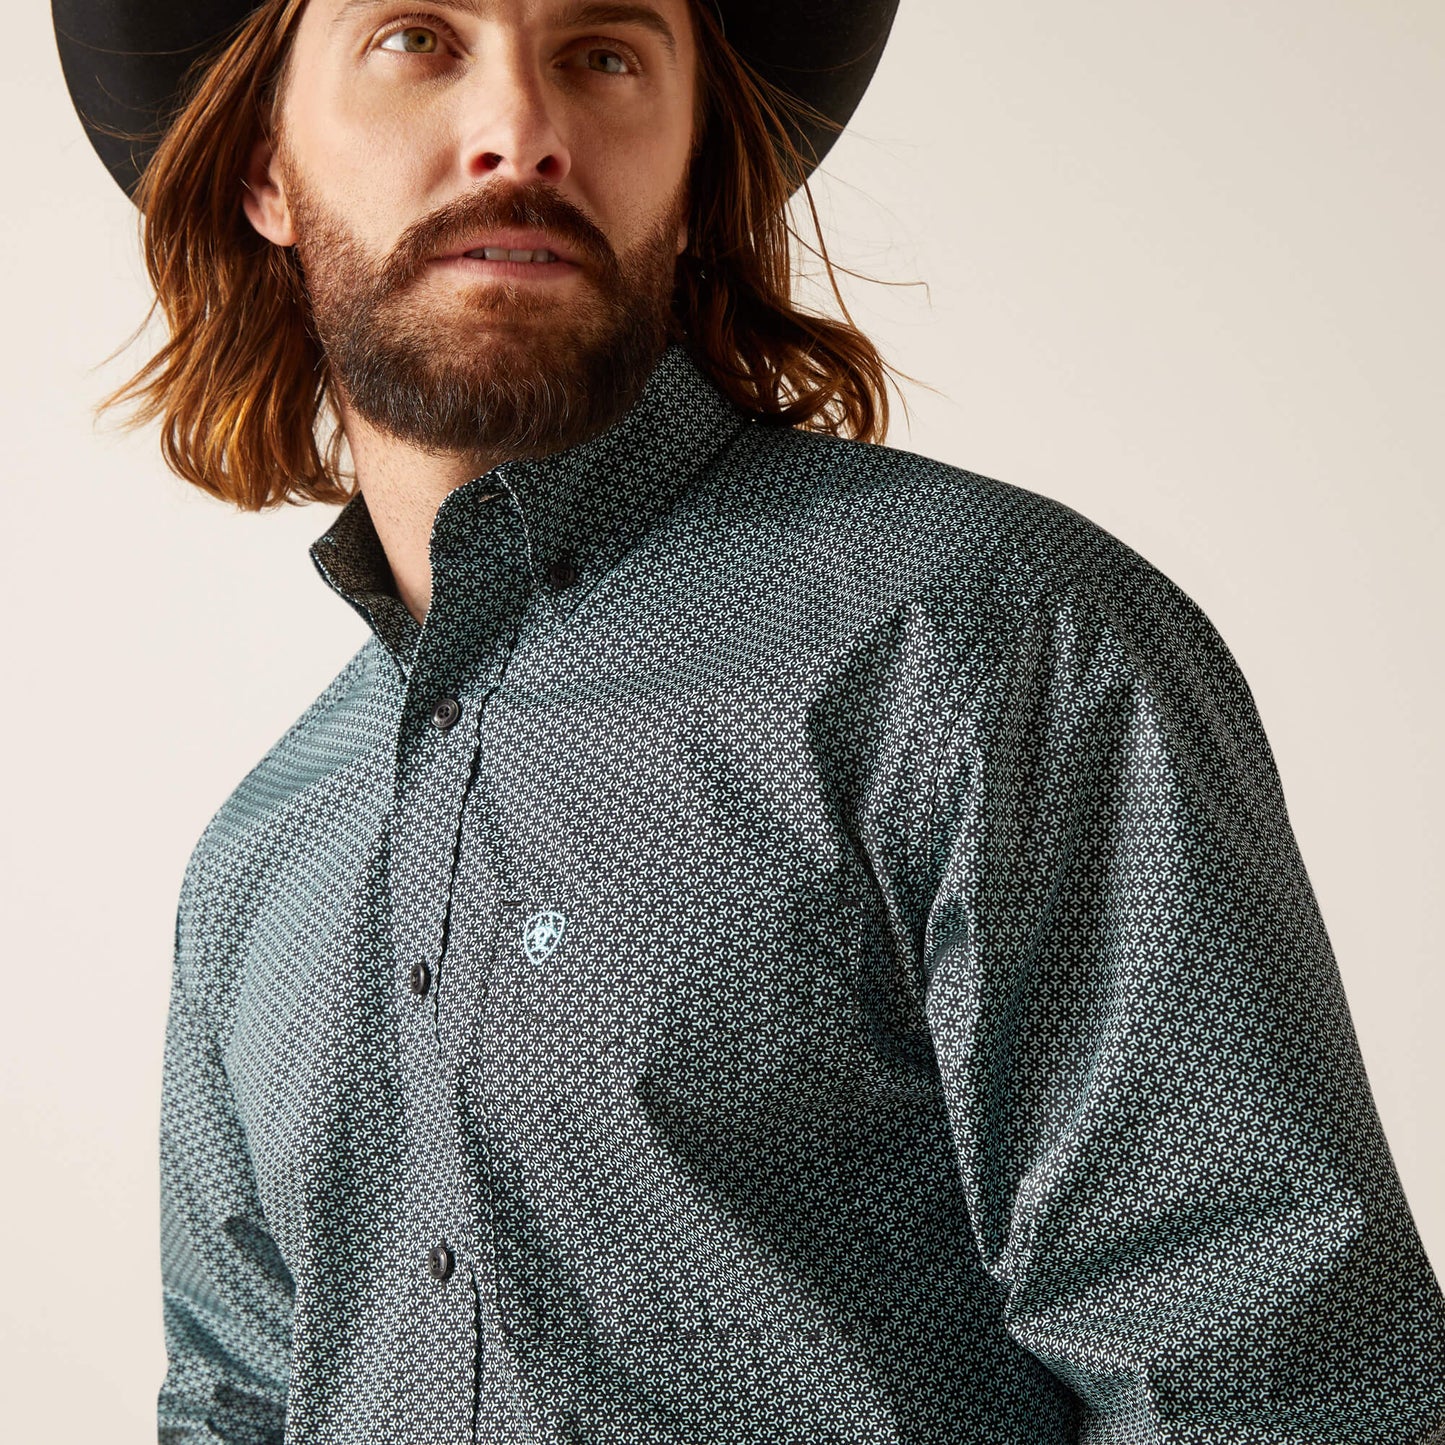 Ariat Nate Classic Fit Shirt